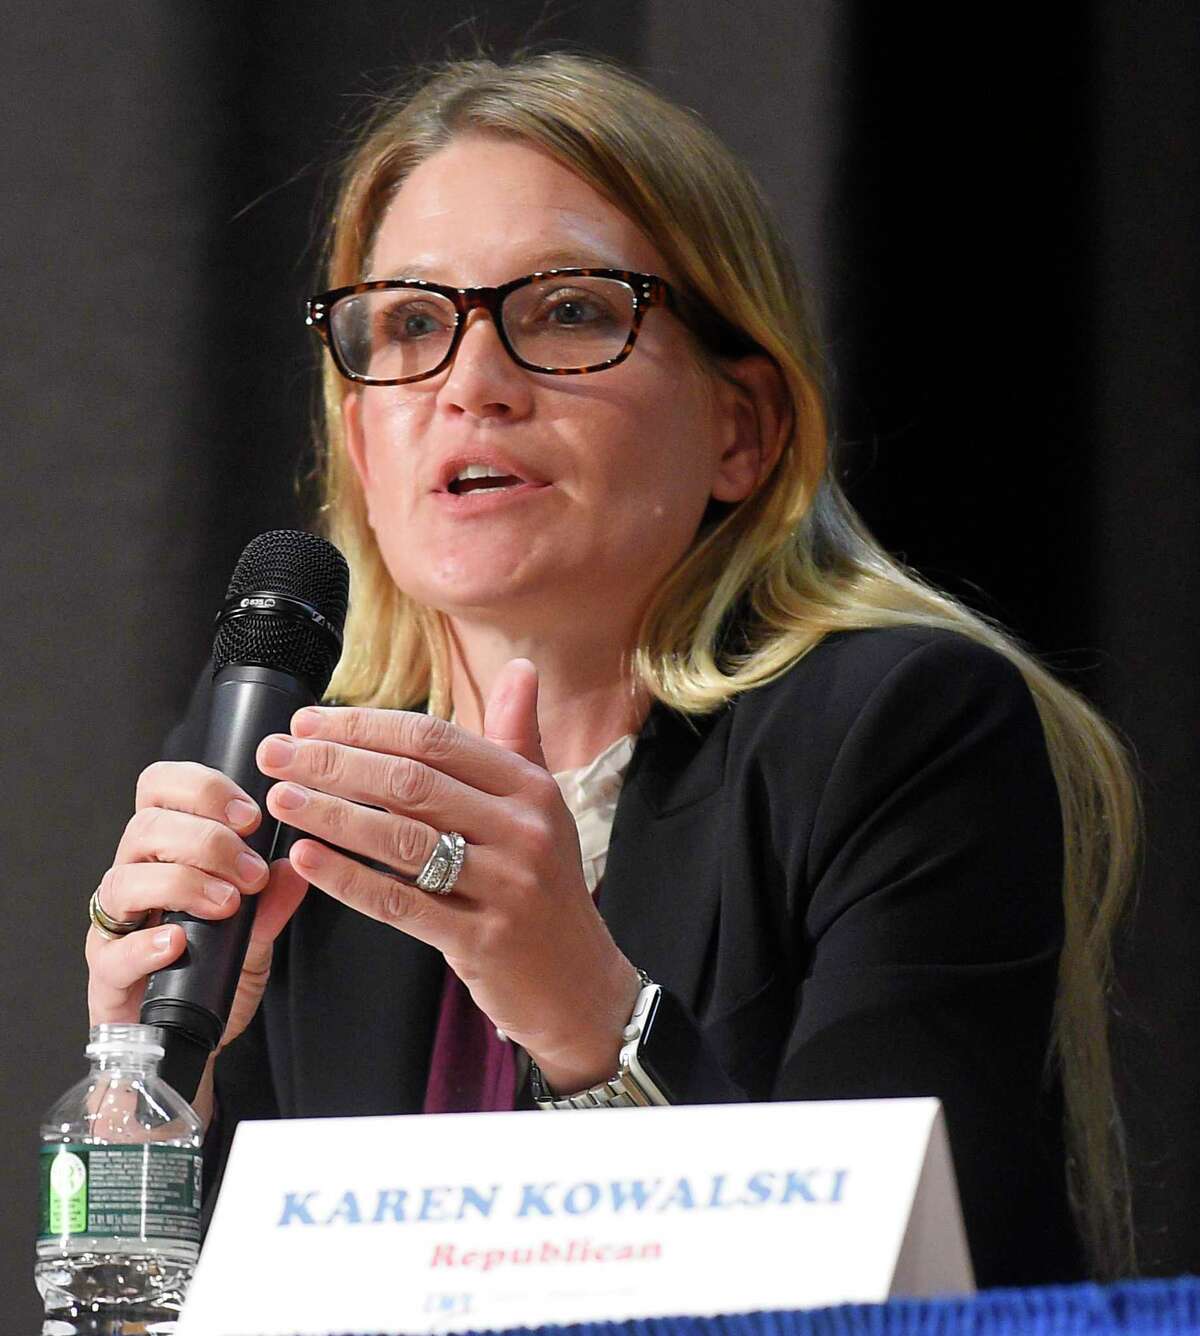 Karen Kowalski during a voters forum at Central Middle School on Oct. 15, 2019 in Greenwich, Connecticut.